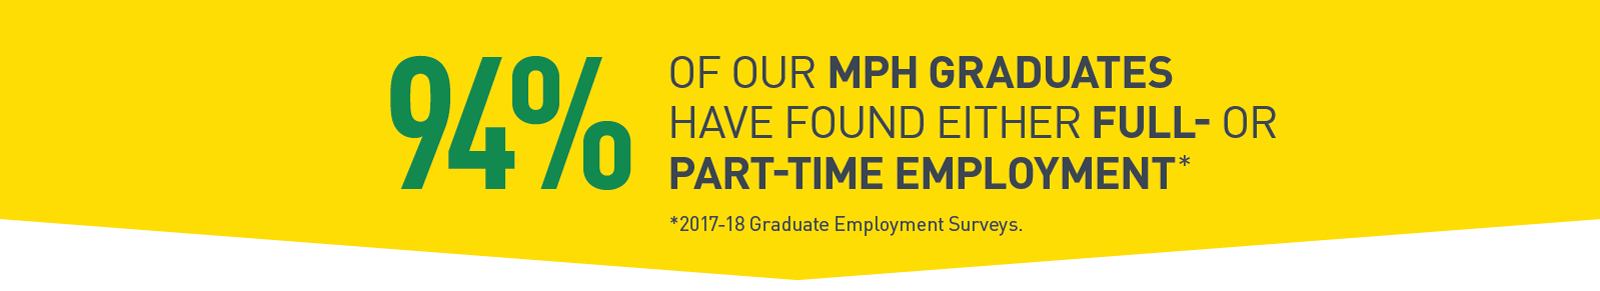 94% of our MPH graduates have found either full- or part-time employment.